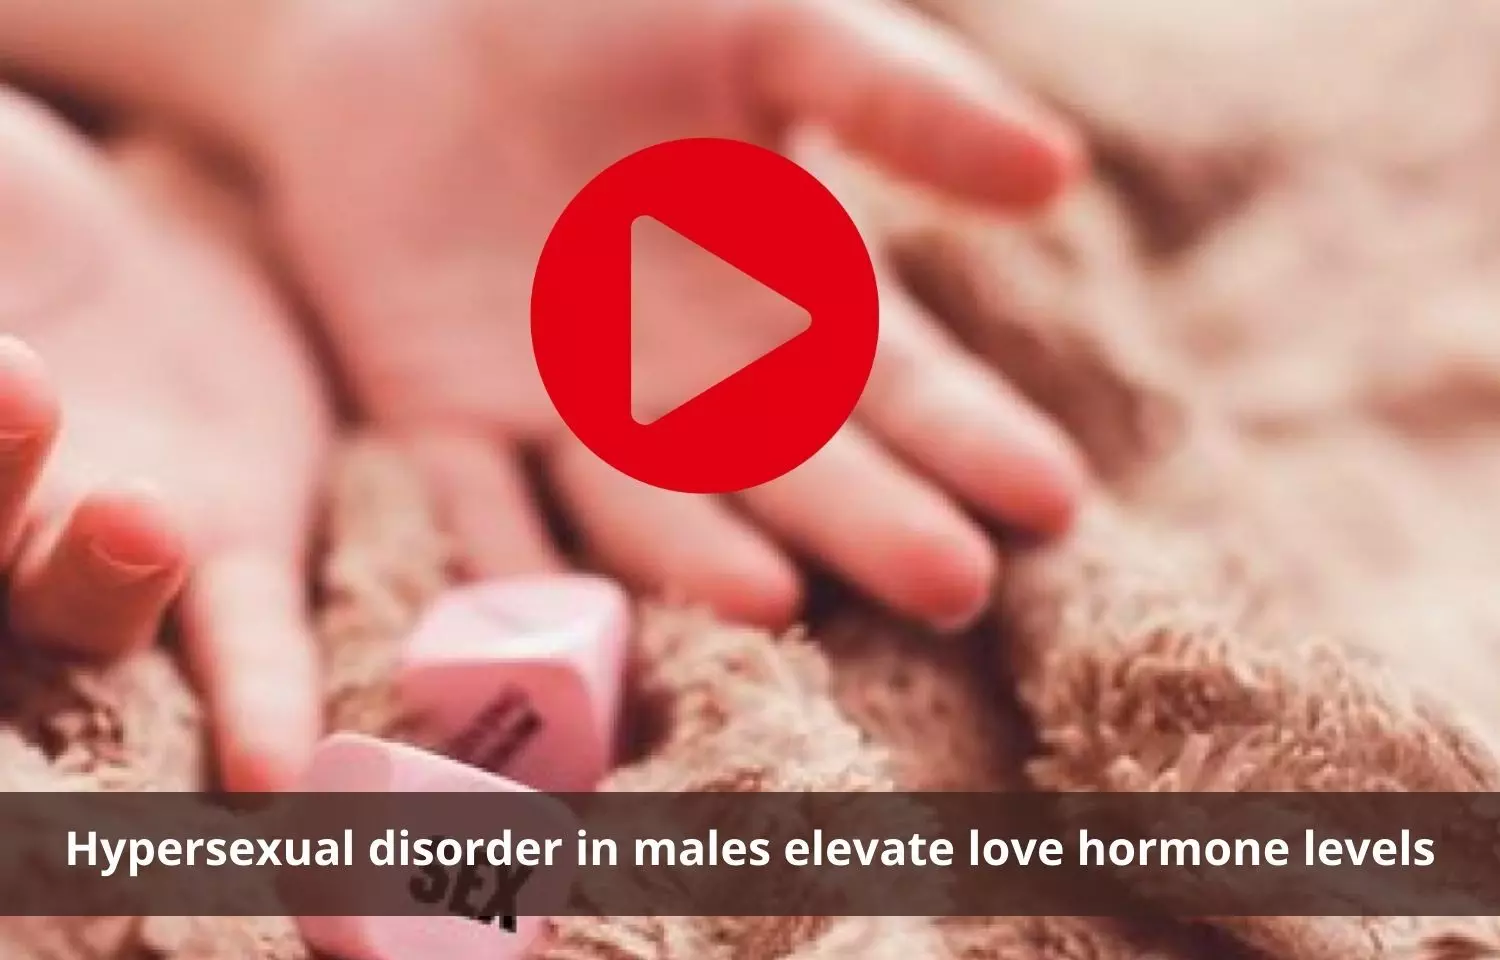 Hypersexual disroder to elevate love hormone levels in males